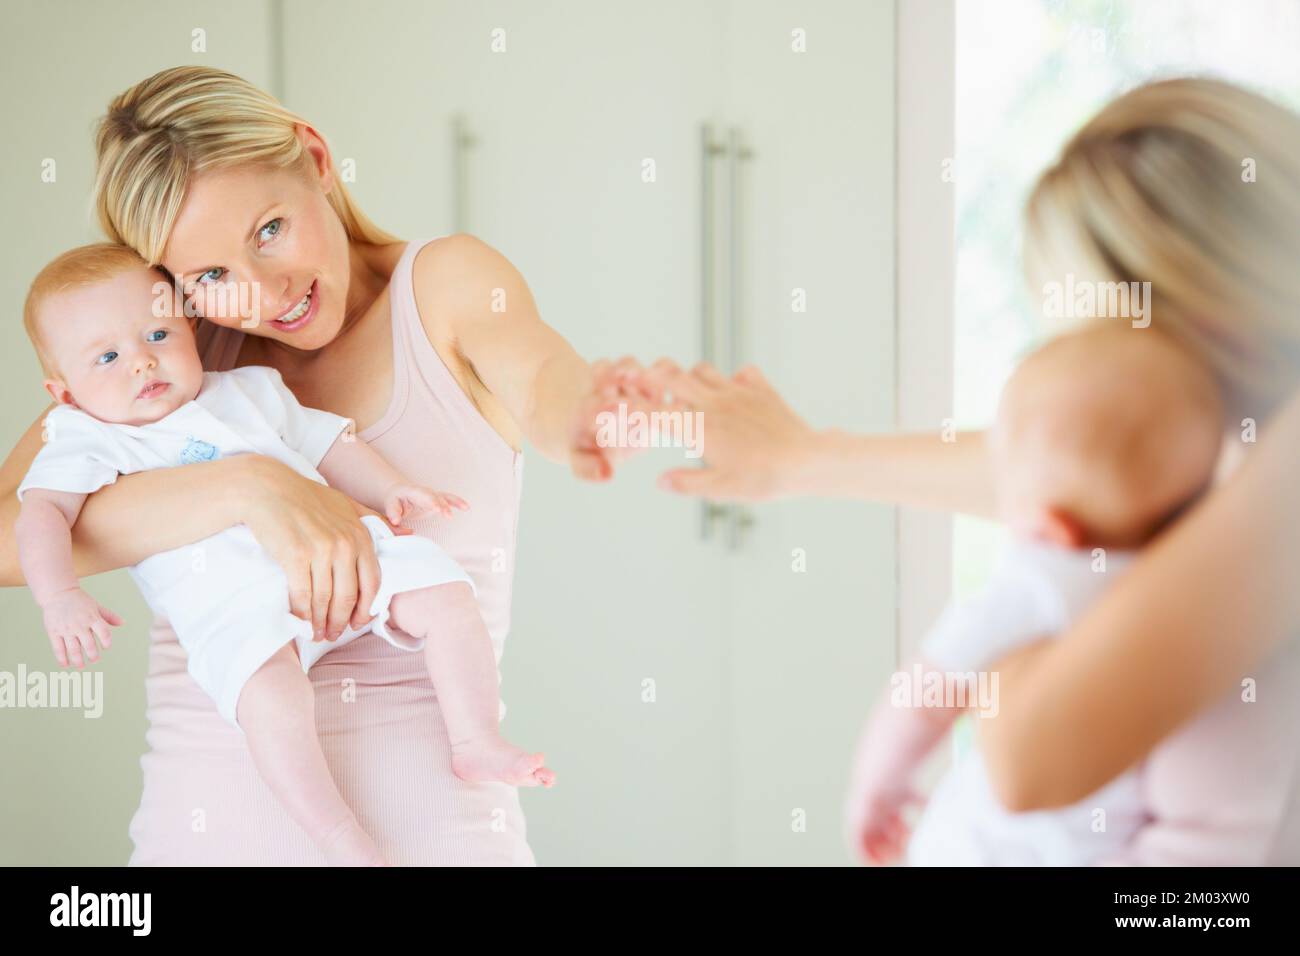 Look how cute you are. A cute baby girl looking at herself in the mirror while her mom points. Stock Photo